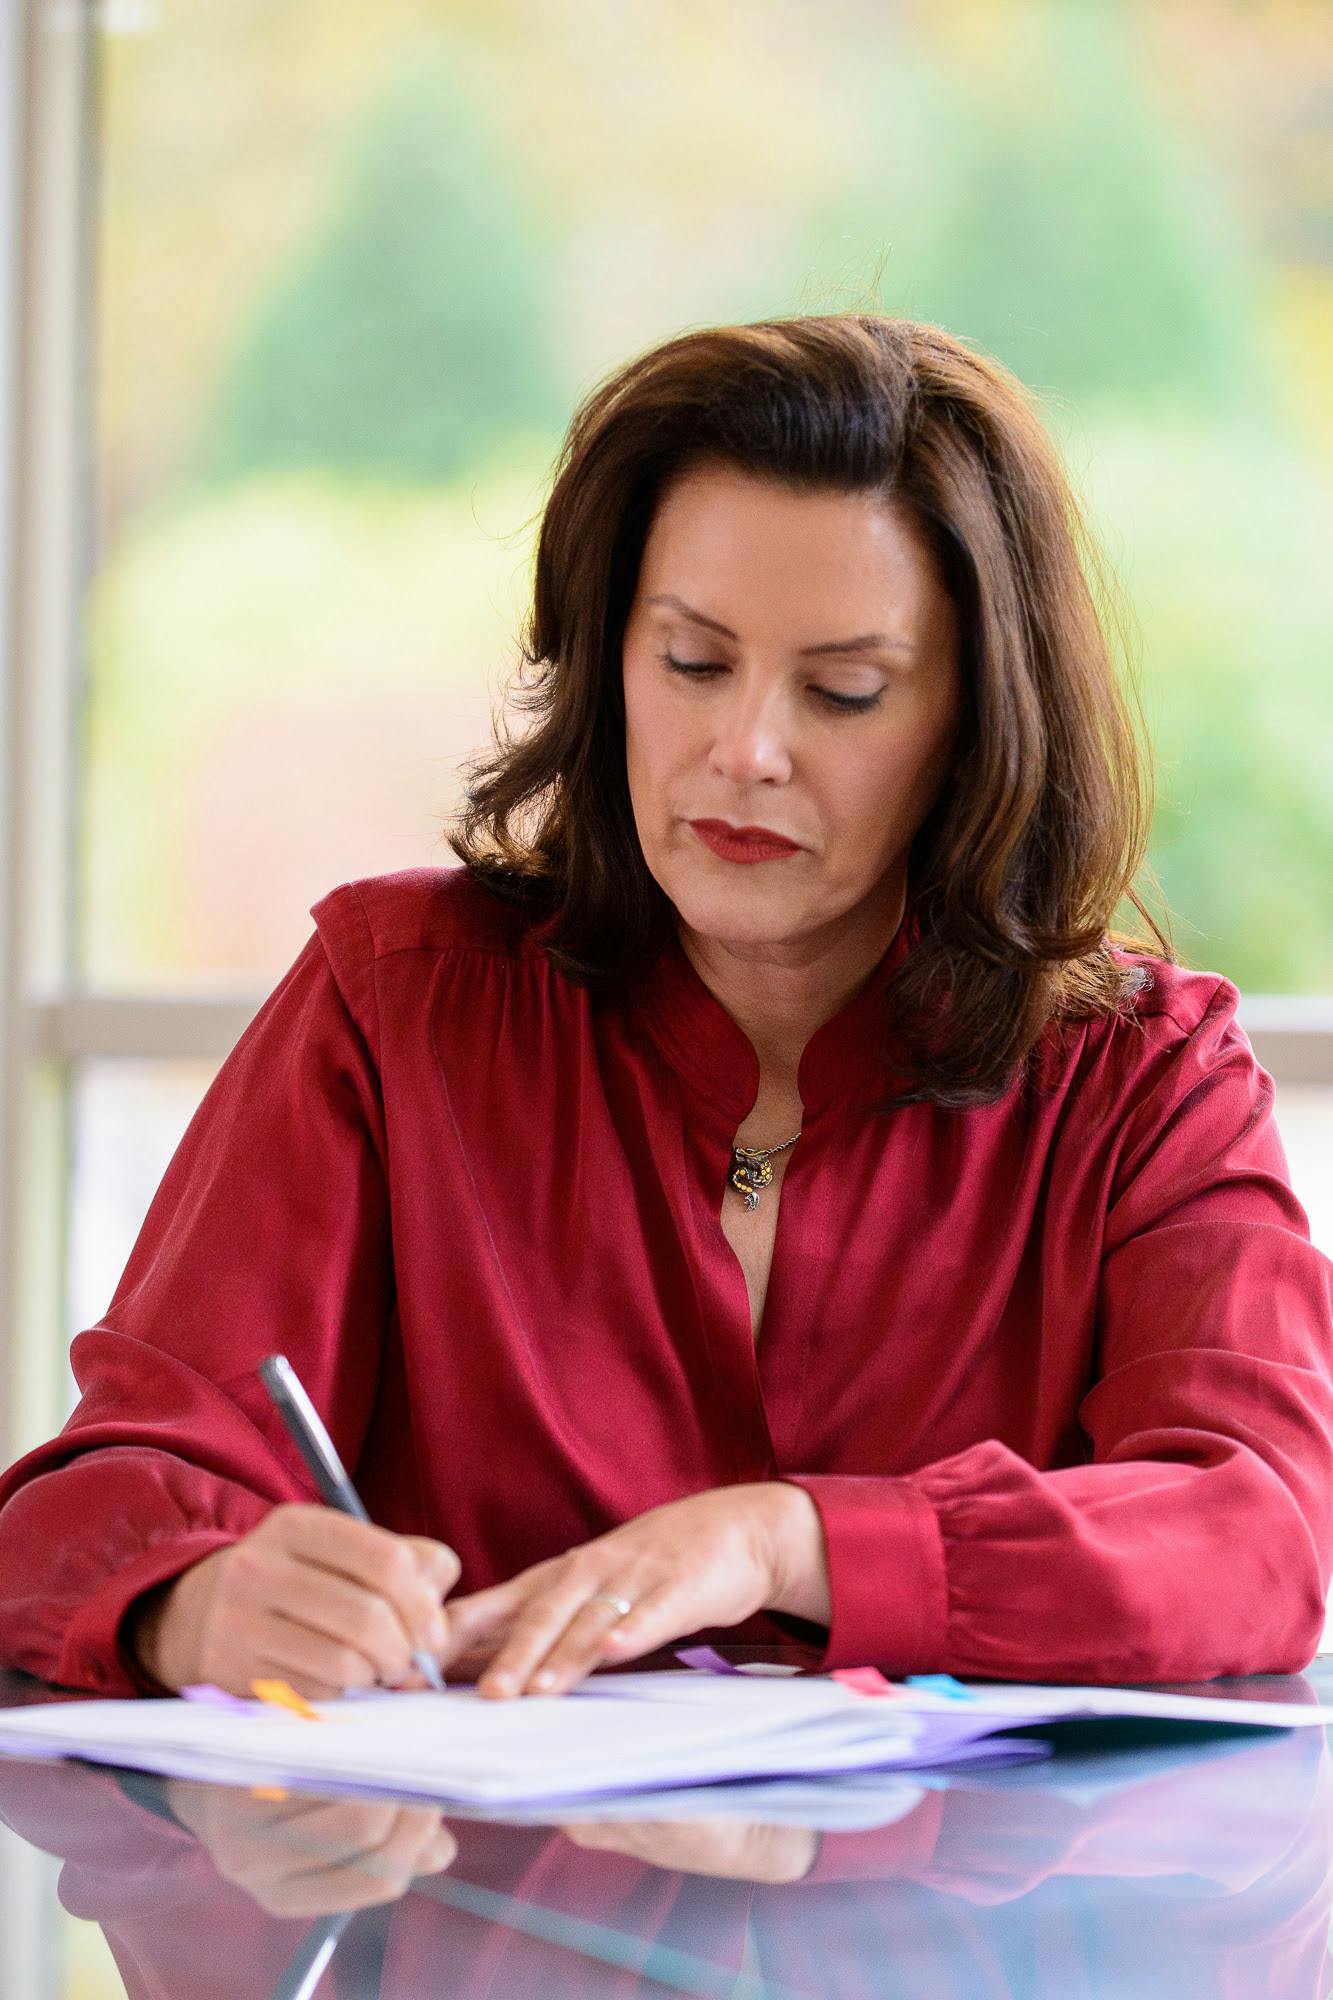 <p>Gov. Gretchen Whitmer signs bipartisan bills extending unemployment benefits to 26 weeks on Oct. 20, 2020. Courtesy photo provided by Michigan Executive Office of the Governor.</p>